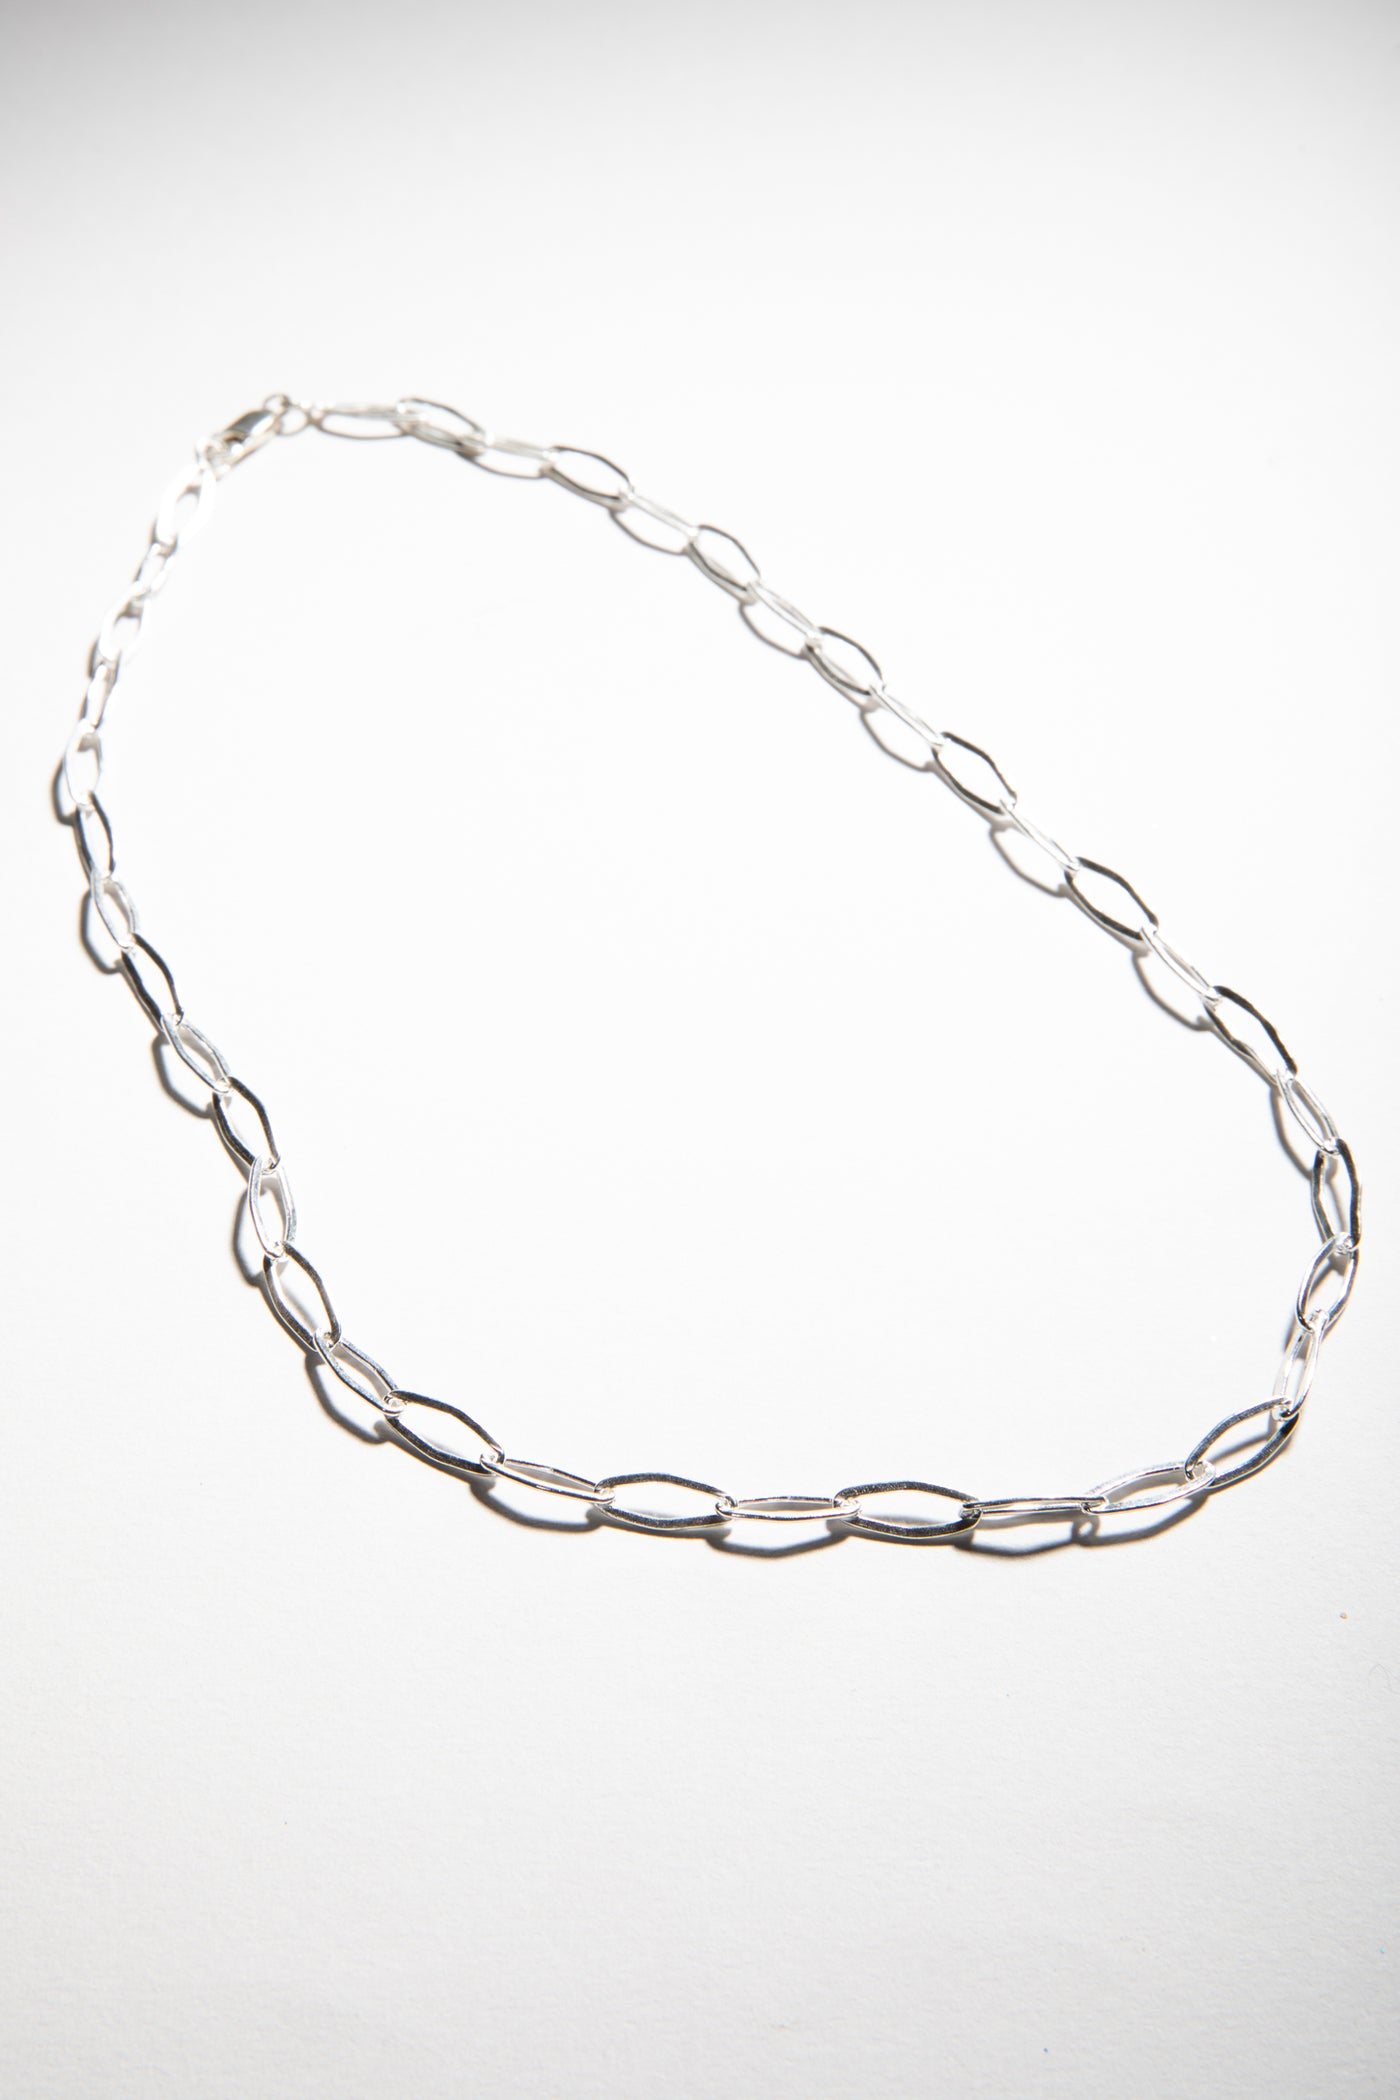 Link Chain Sterling Silver Necklace